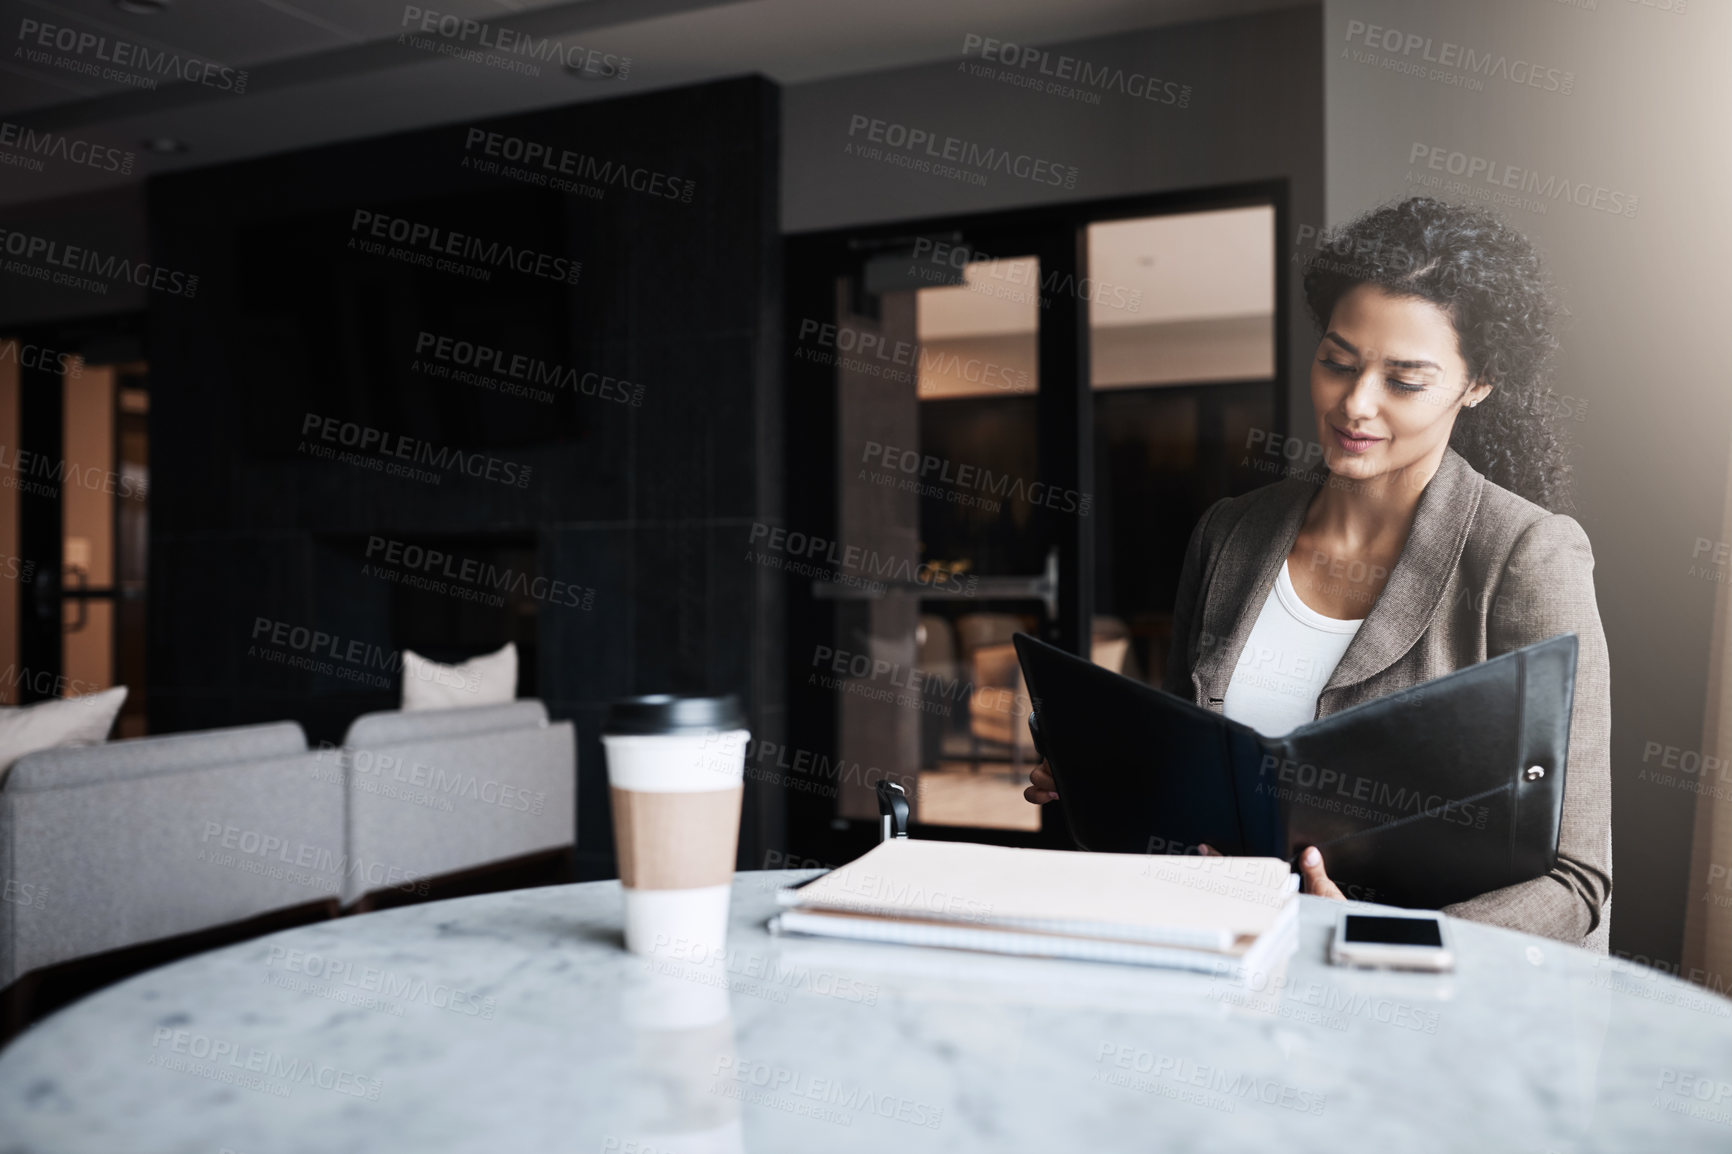 Buy stock photo Shot of a young businesswoman reading through a business folder in a cafe